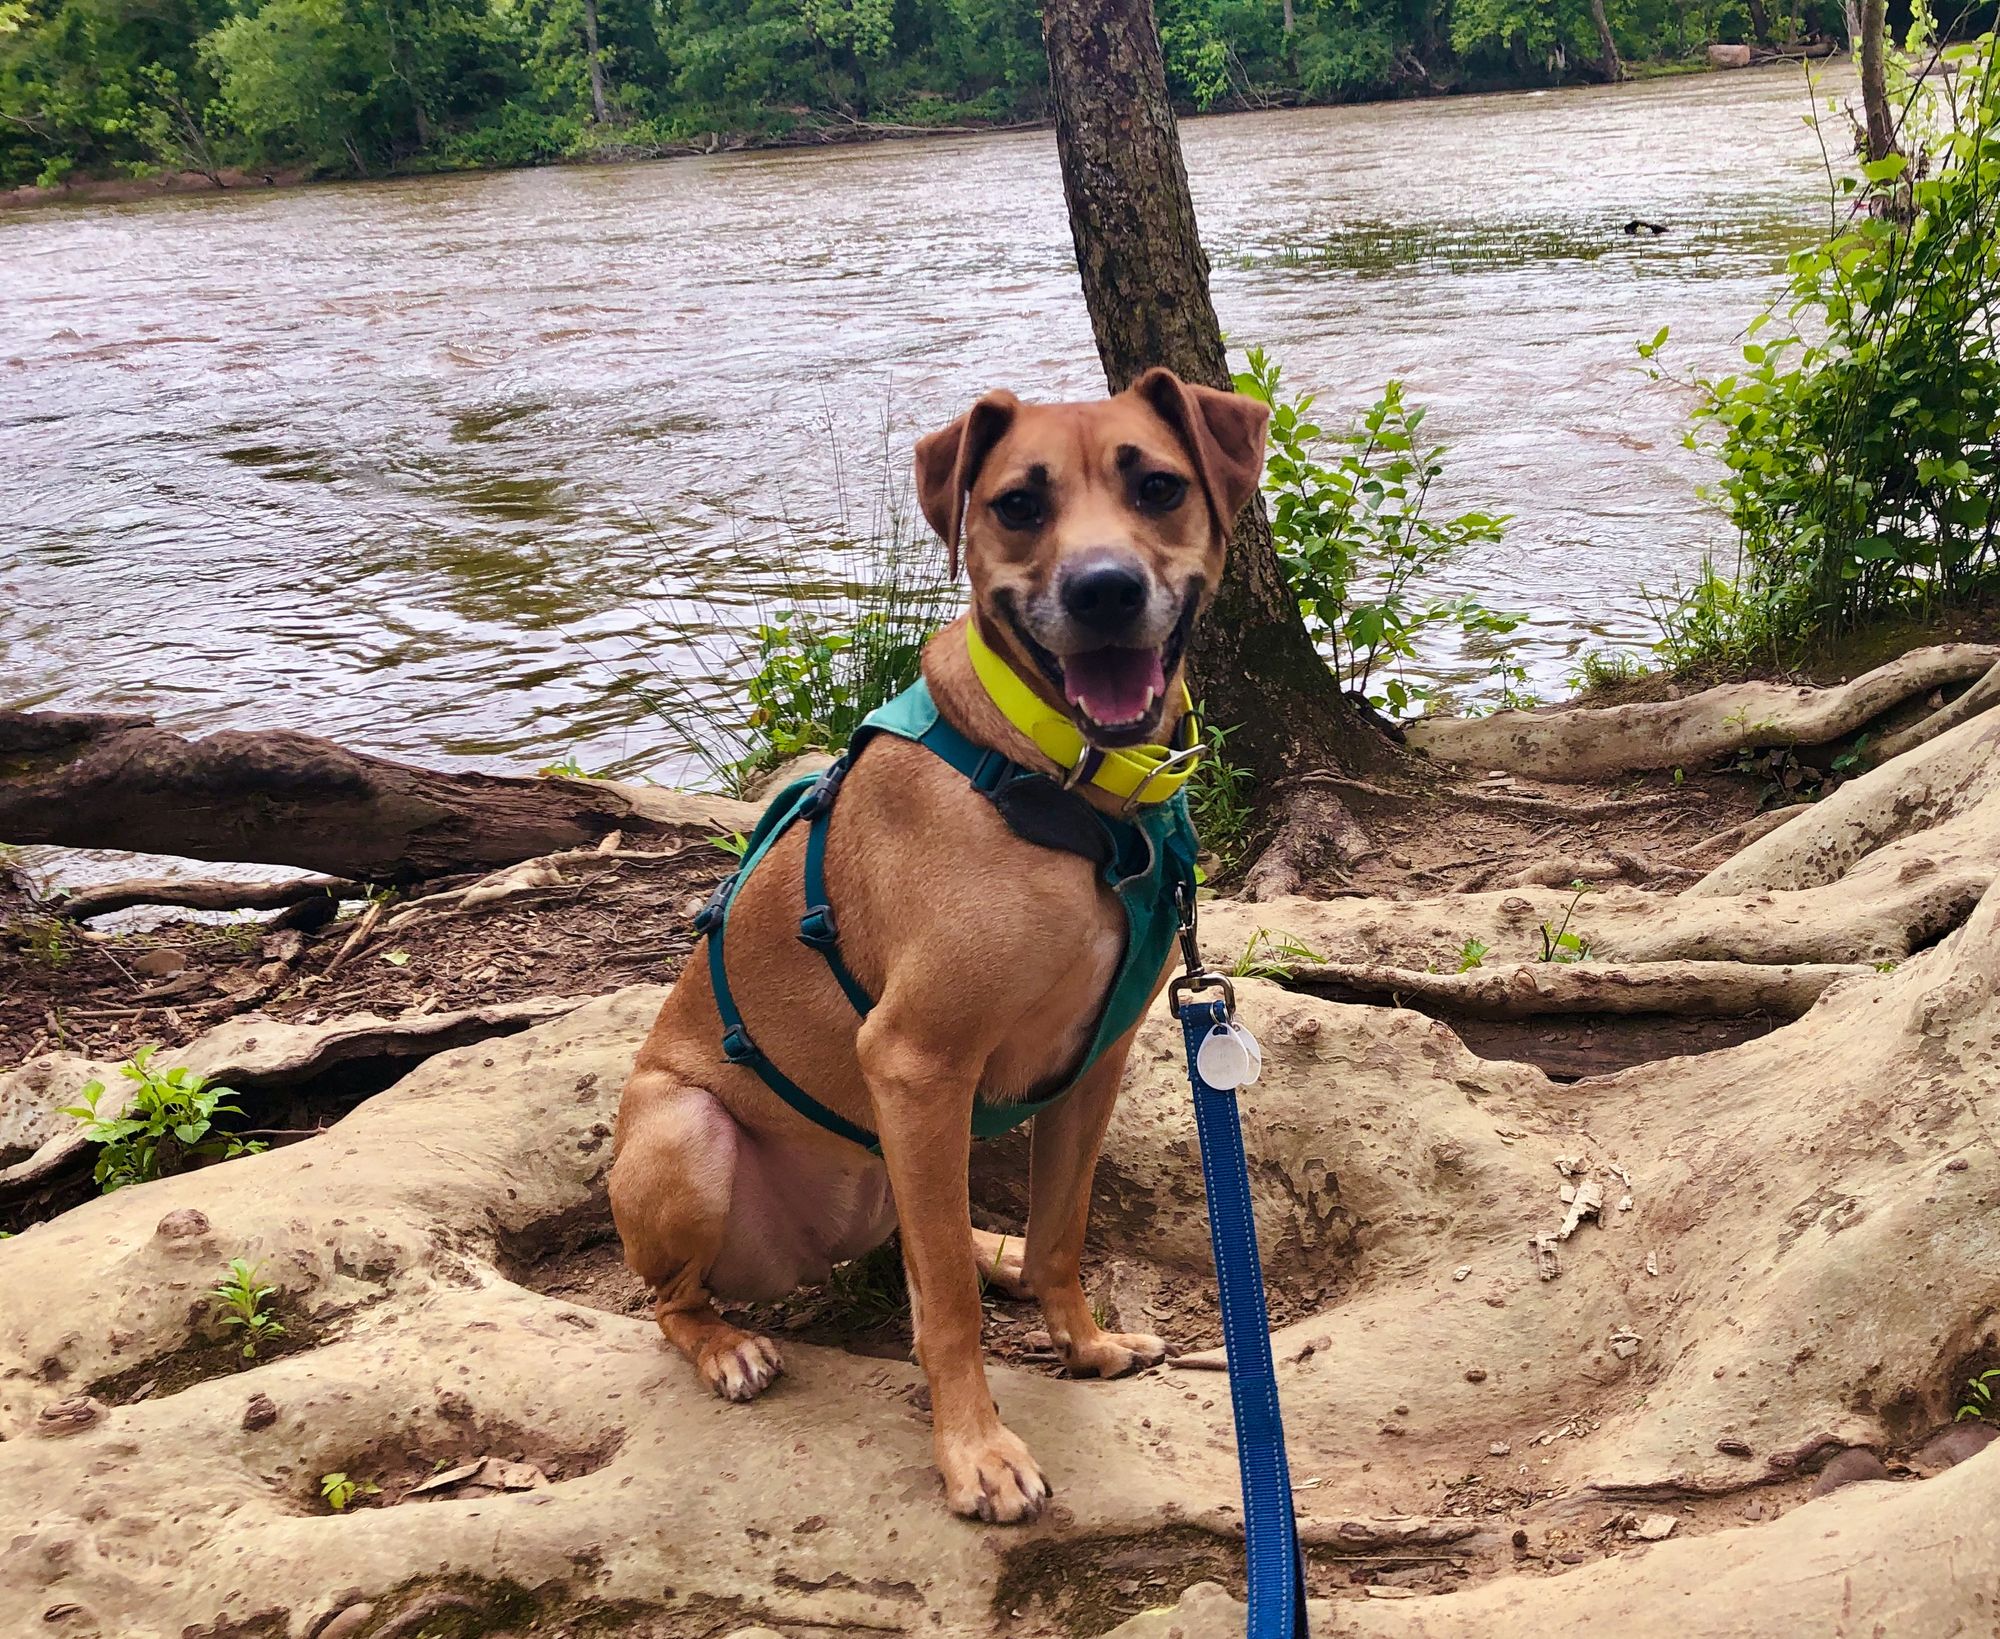 A small brown dog sits by the river